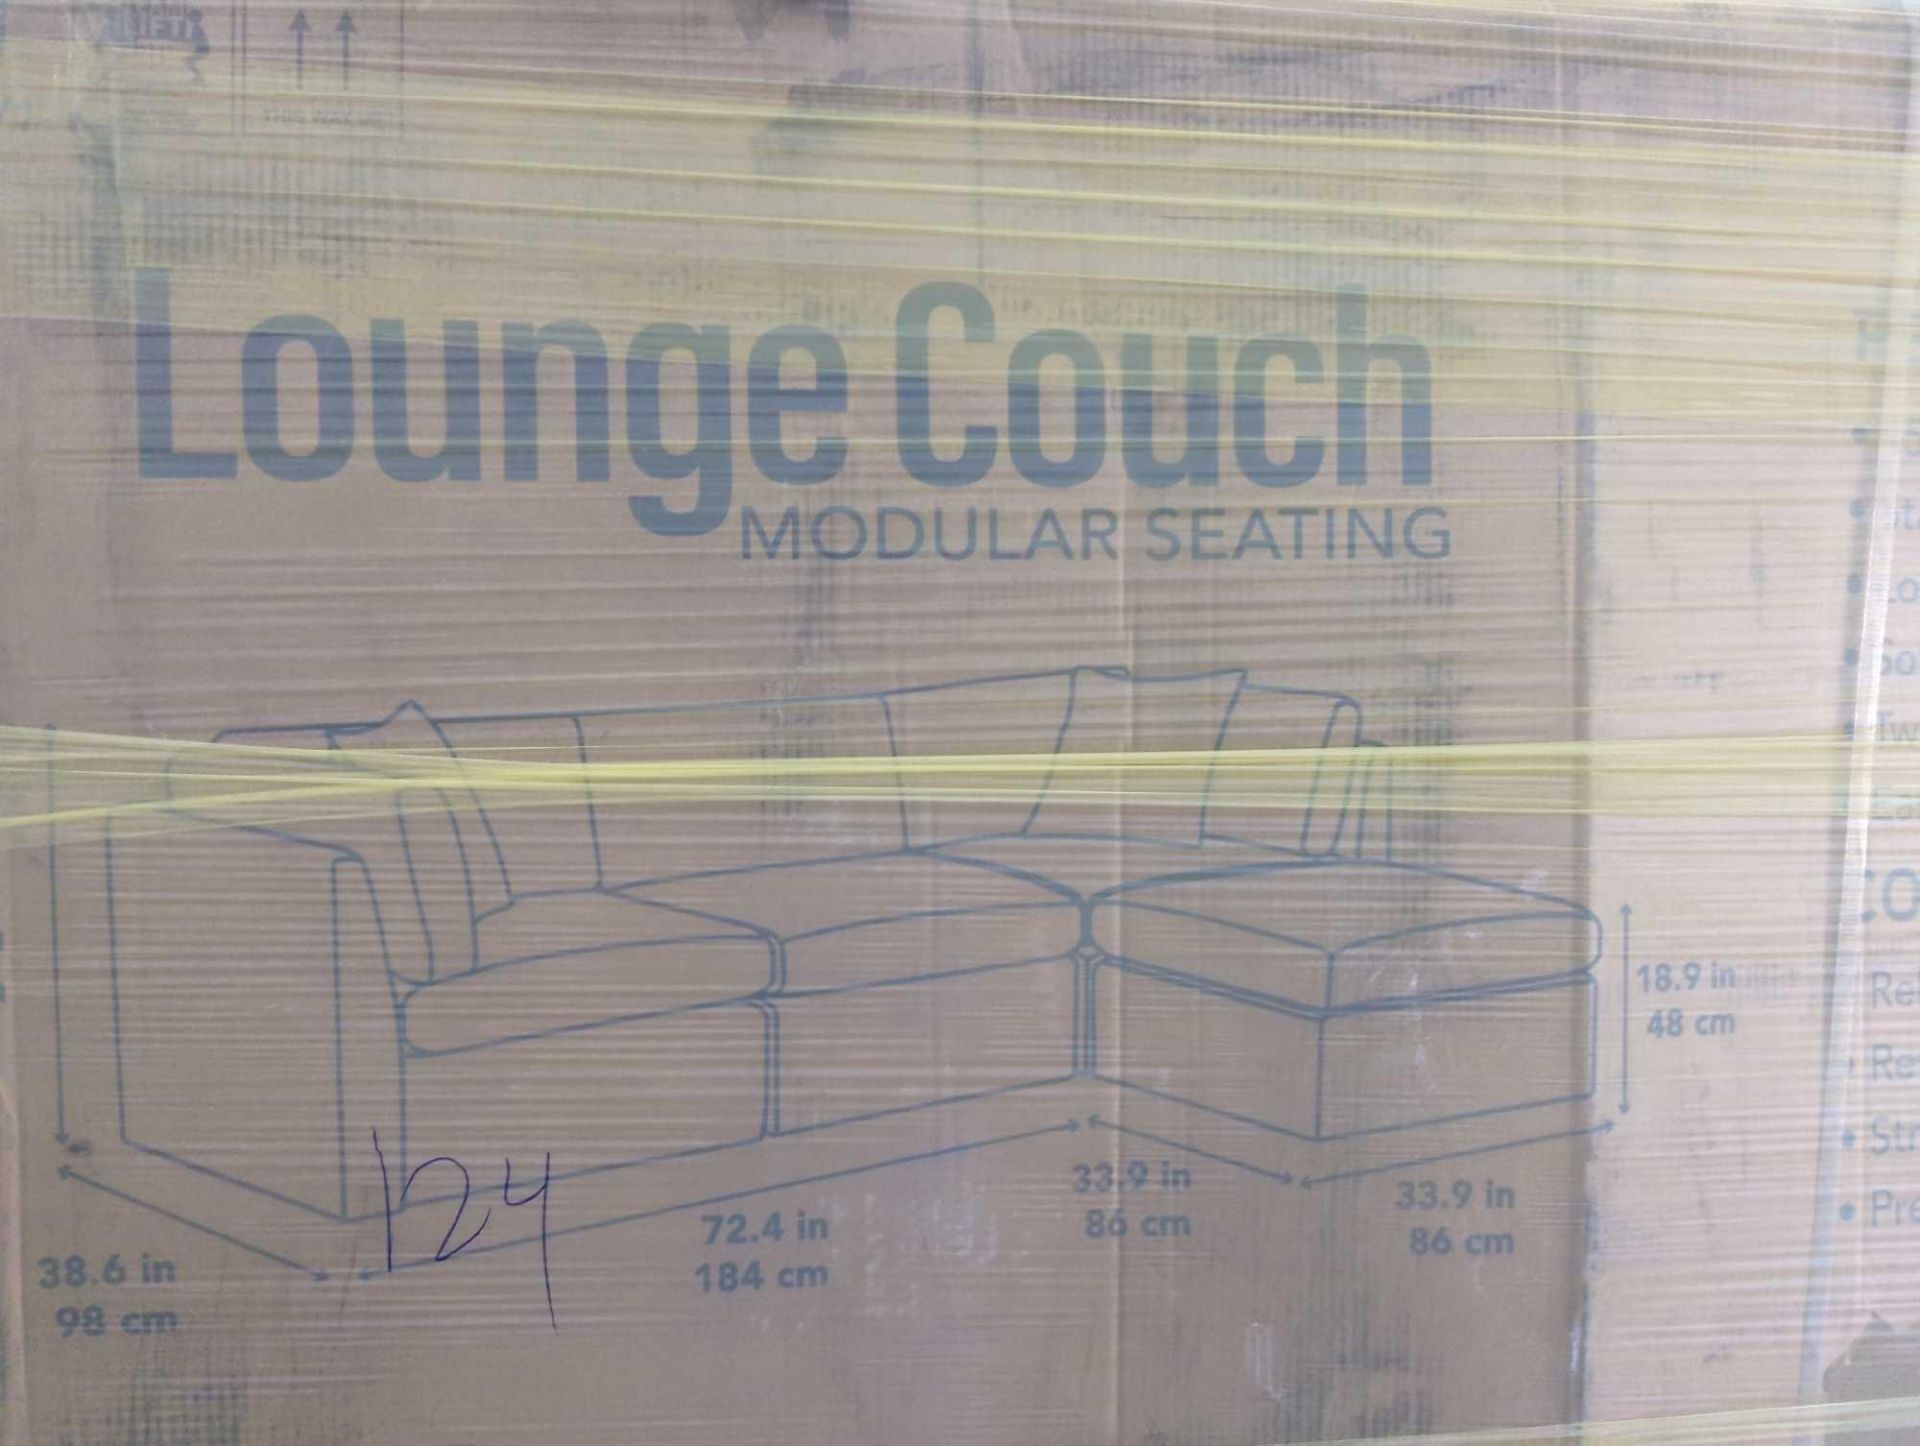 Cole & Rye Lounge couch - Image 2 of 4